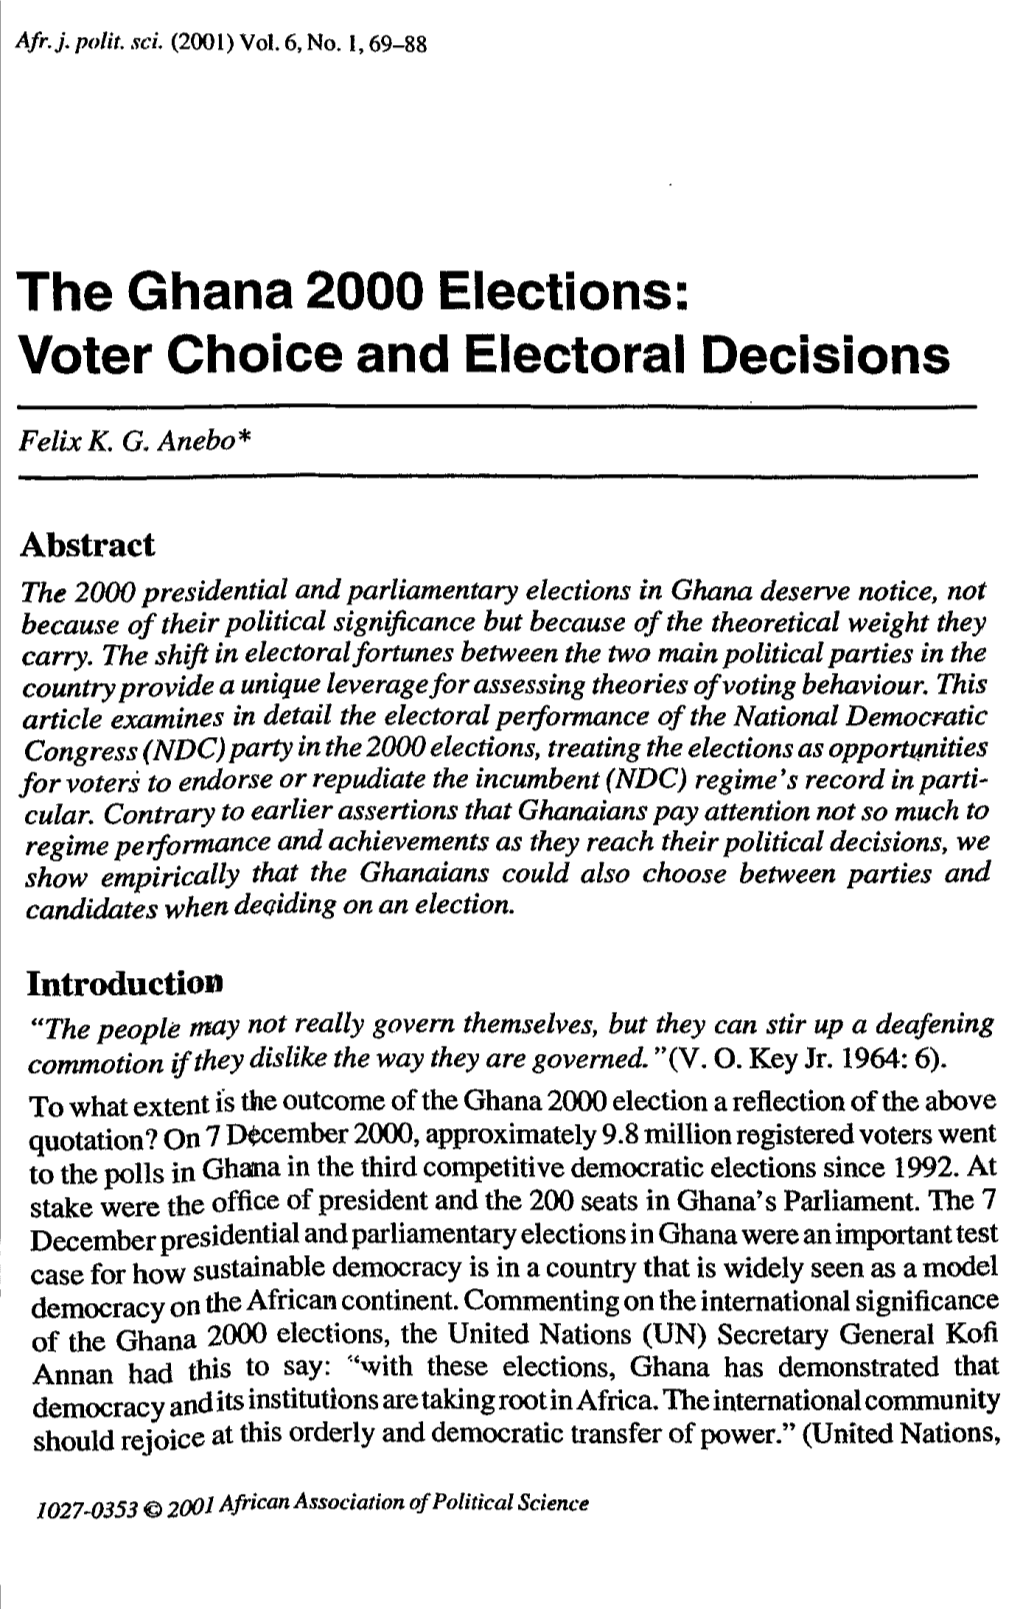 The Ghana 2000 Elections: Voter Choice and Electoral Decisions